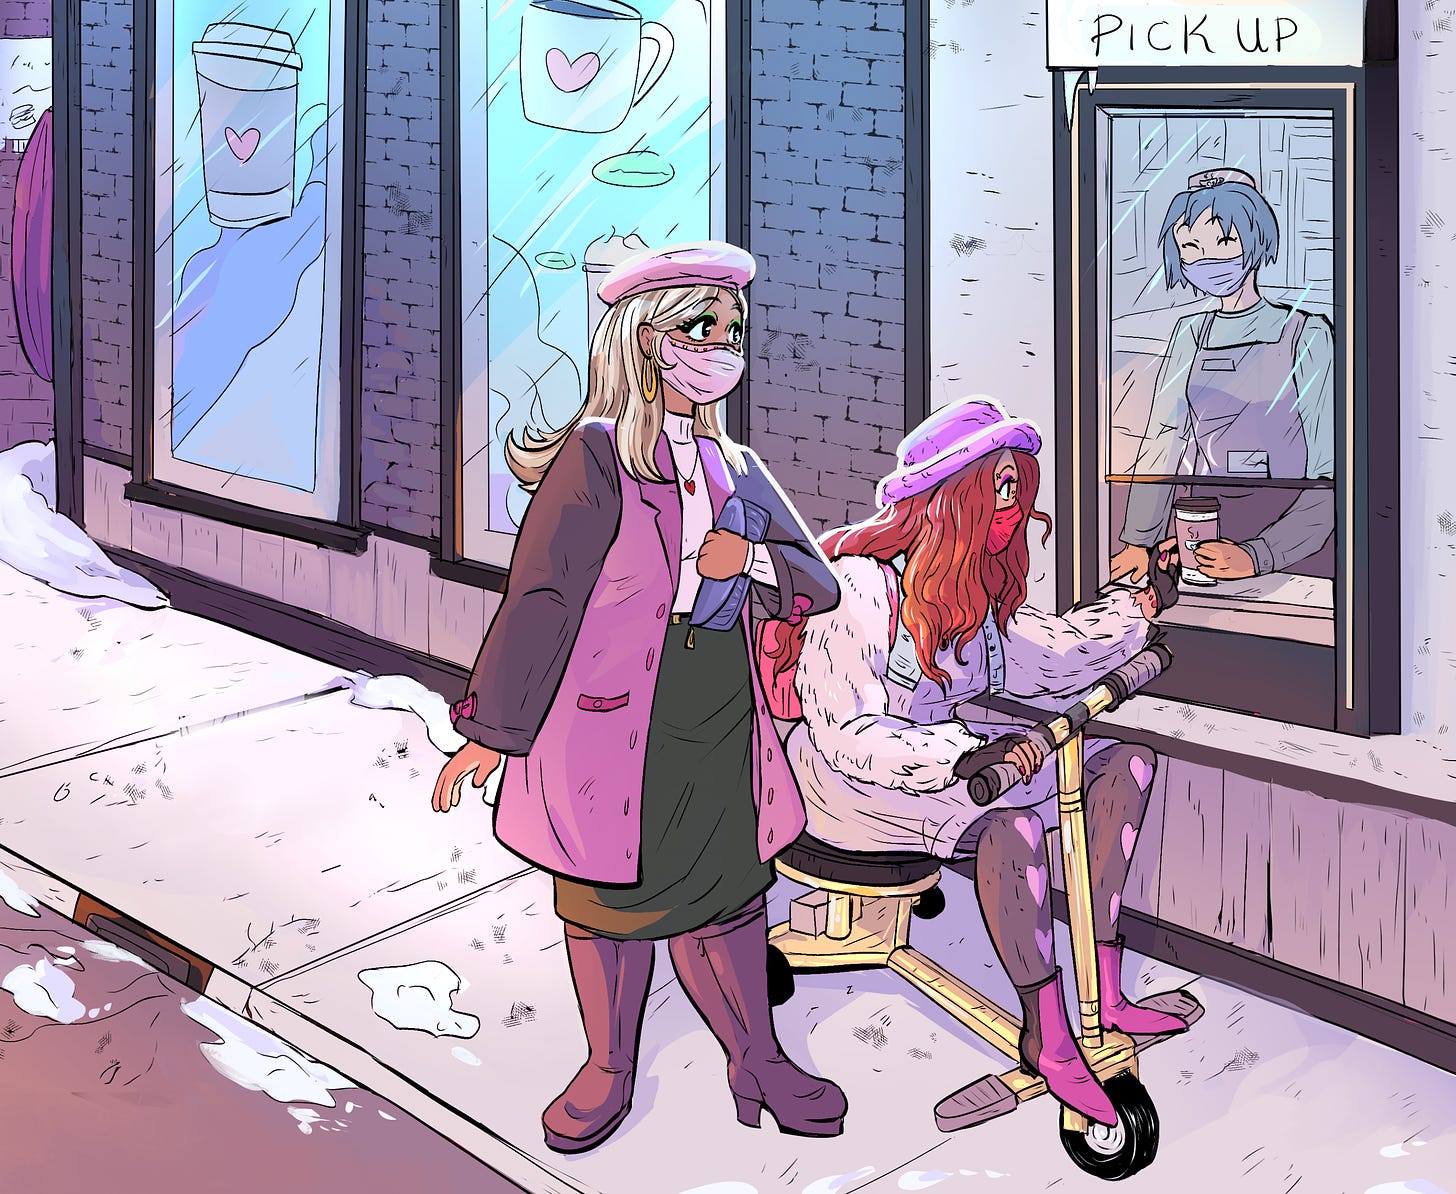 Two chic Black women grab coffee from an outdoor pick-up window. The woman closest to the barista is in a gold-customized travel mobility scooter and wears a fuzzy purple bucket hat, sweater dress, pink backpack, and red face mask. Next to her, the second woman waits in a pink coat and beret. Bits of snow gather on the ground and sidewalk while the cafe’s windows are decorated with coffee decals.